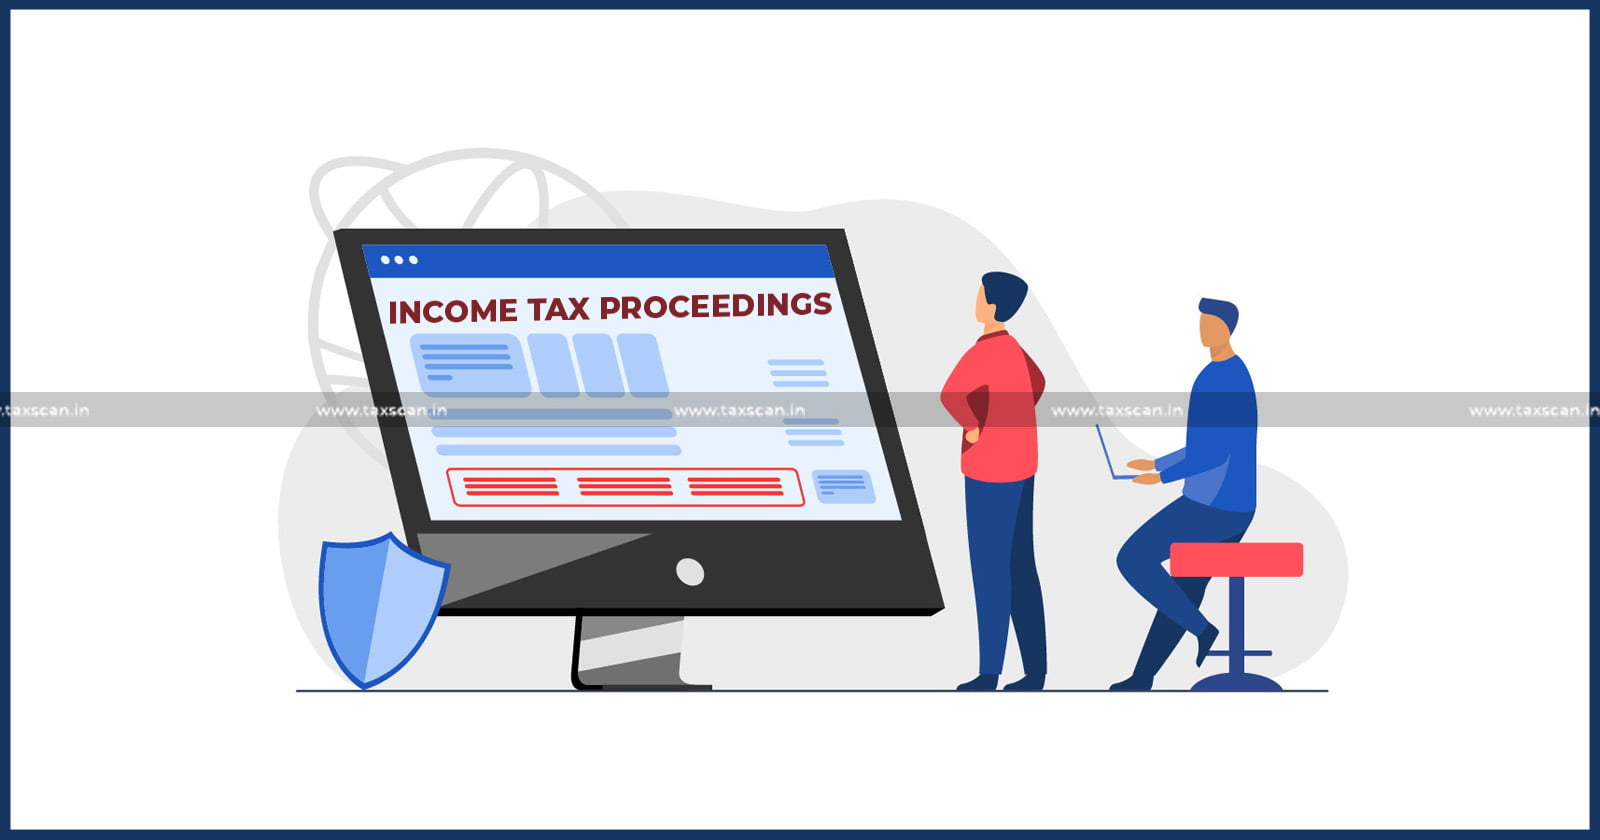 Assessing Officer has Right to Control the Conduct of Cross Examination - Assessing Officer - Cross Examination During Income Tax Proceedings - Income Tax Proceedings - Jharkhand High Court - Taxscan